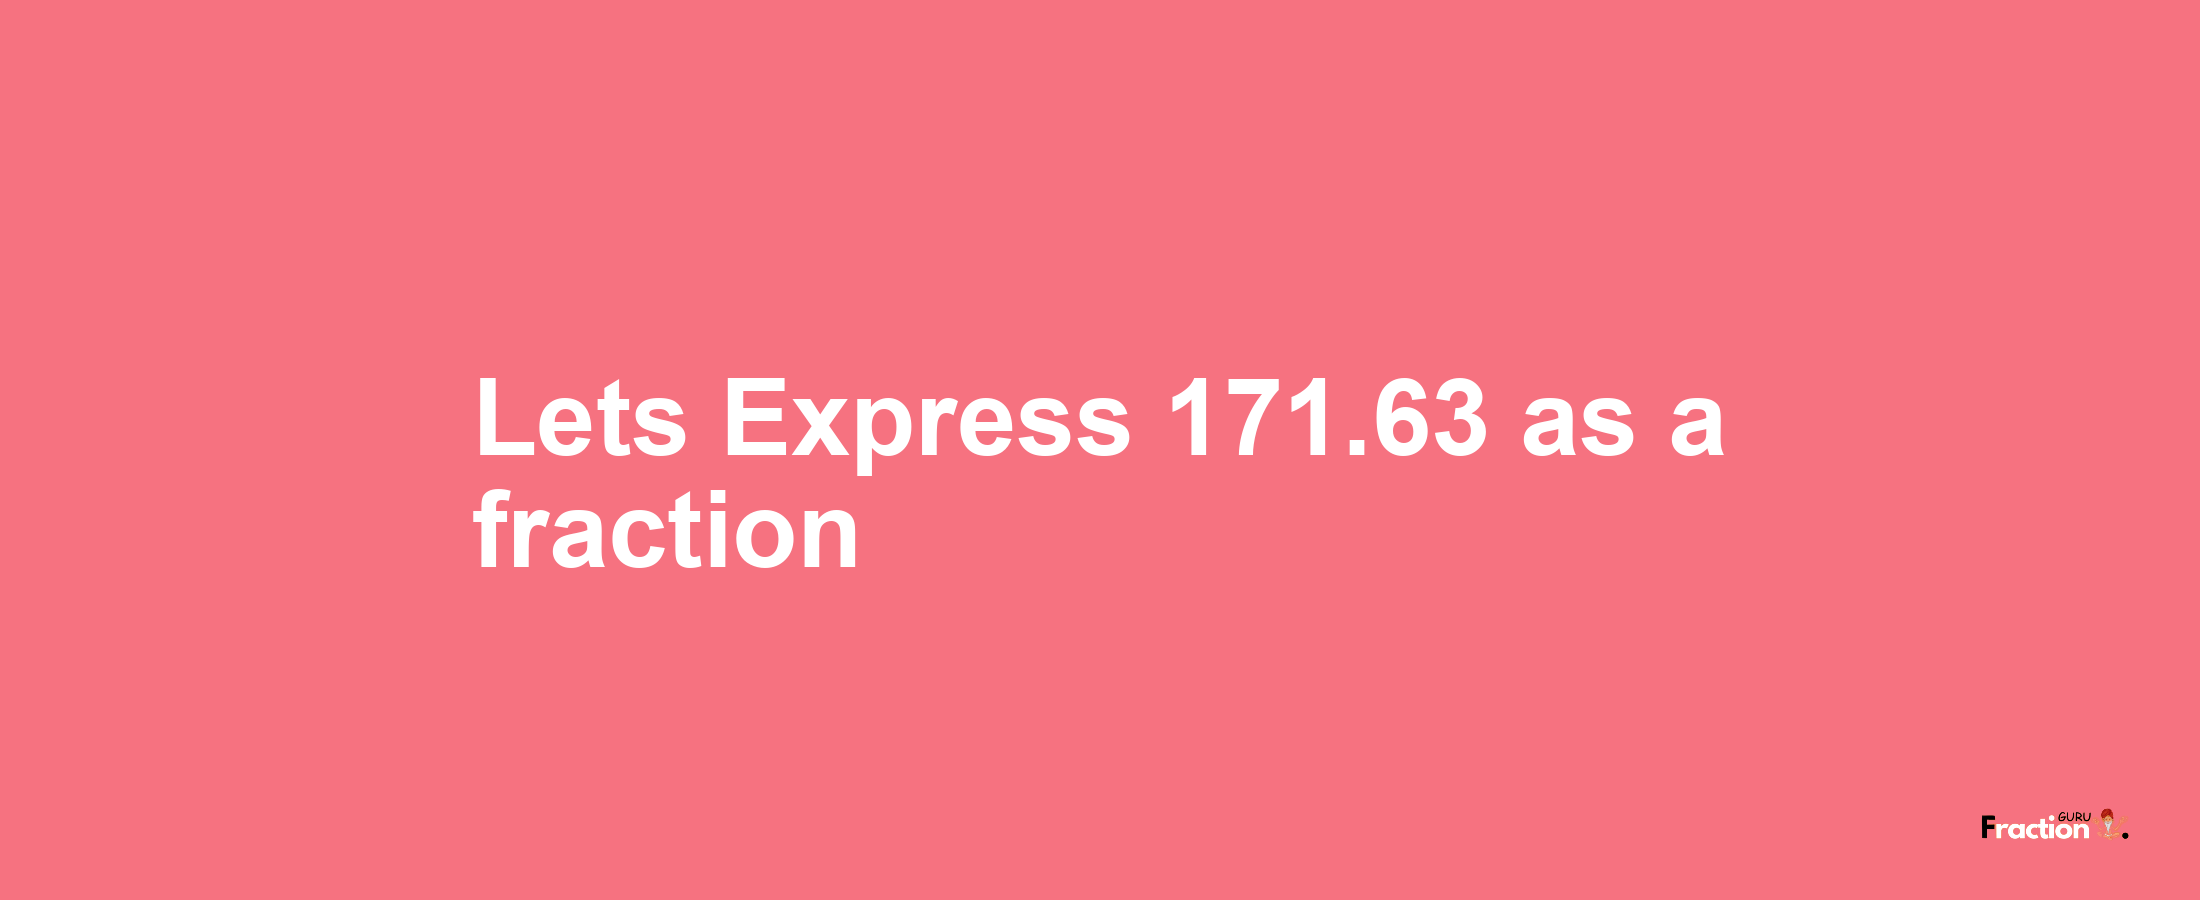 Lets Express 171.63 as afraction